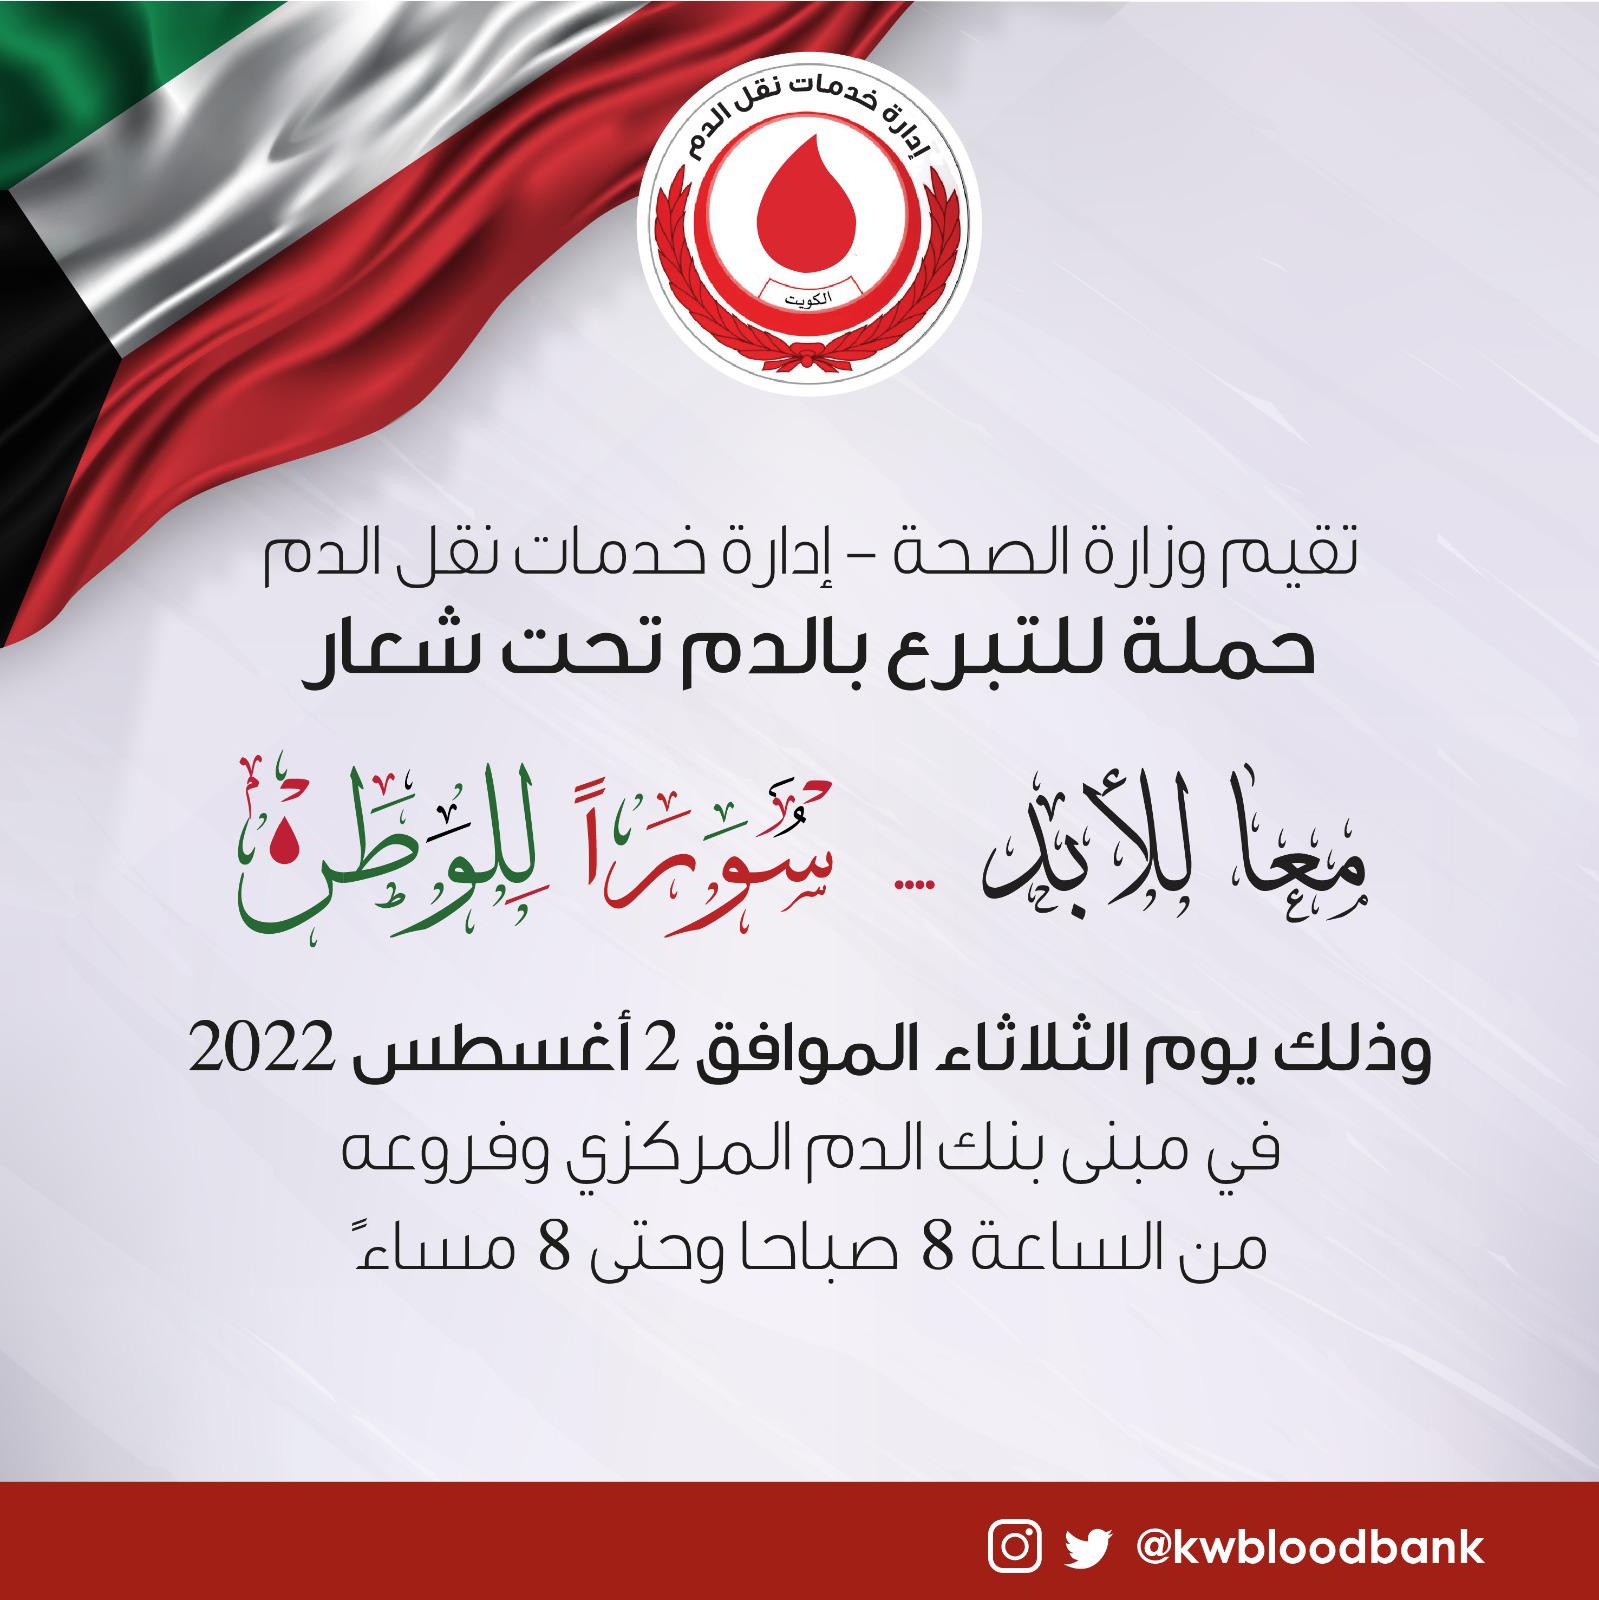 Kuwait MoH launches blood donation campaign next Tuesday